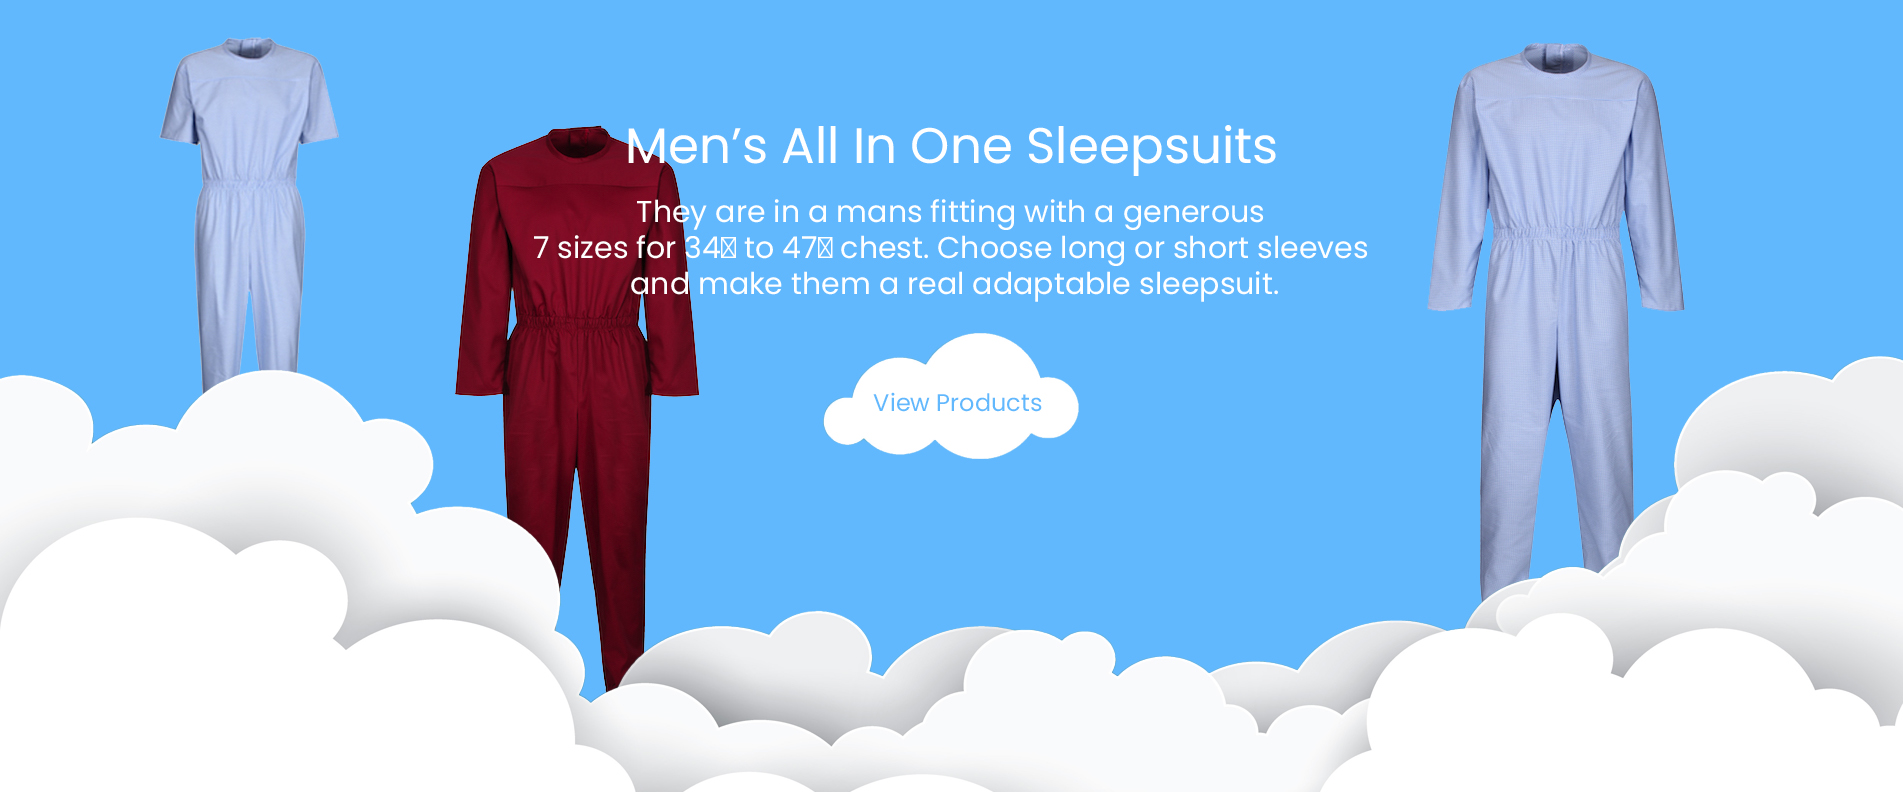 Men’s All In One Sleepsuits